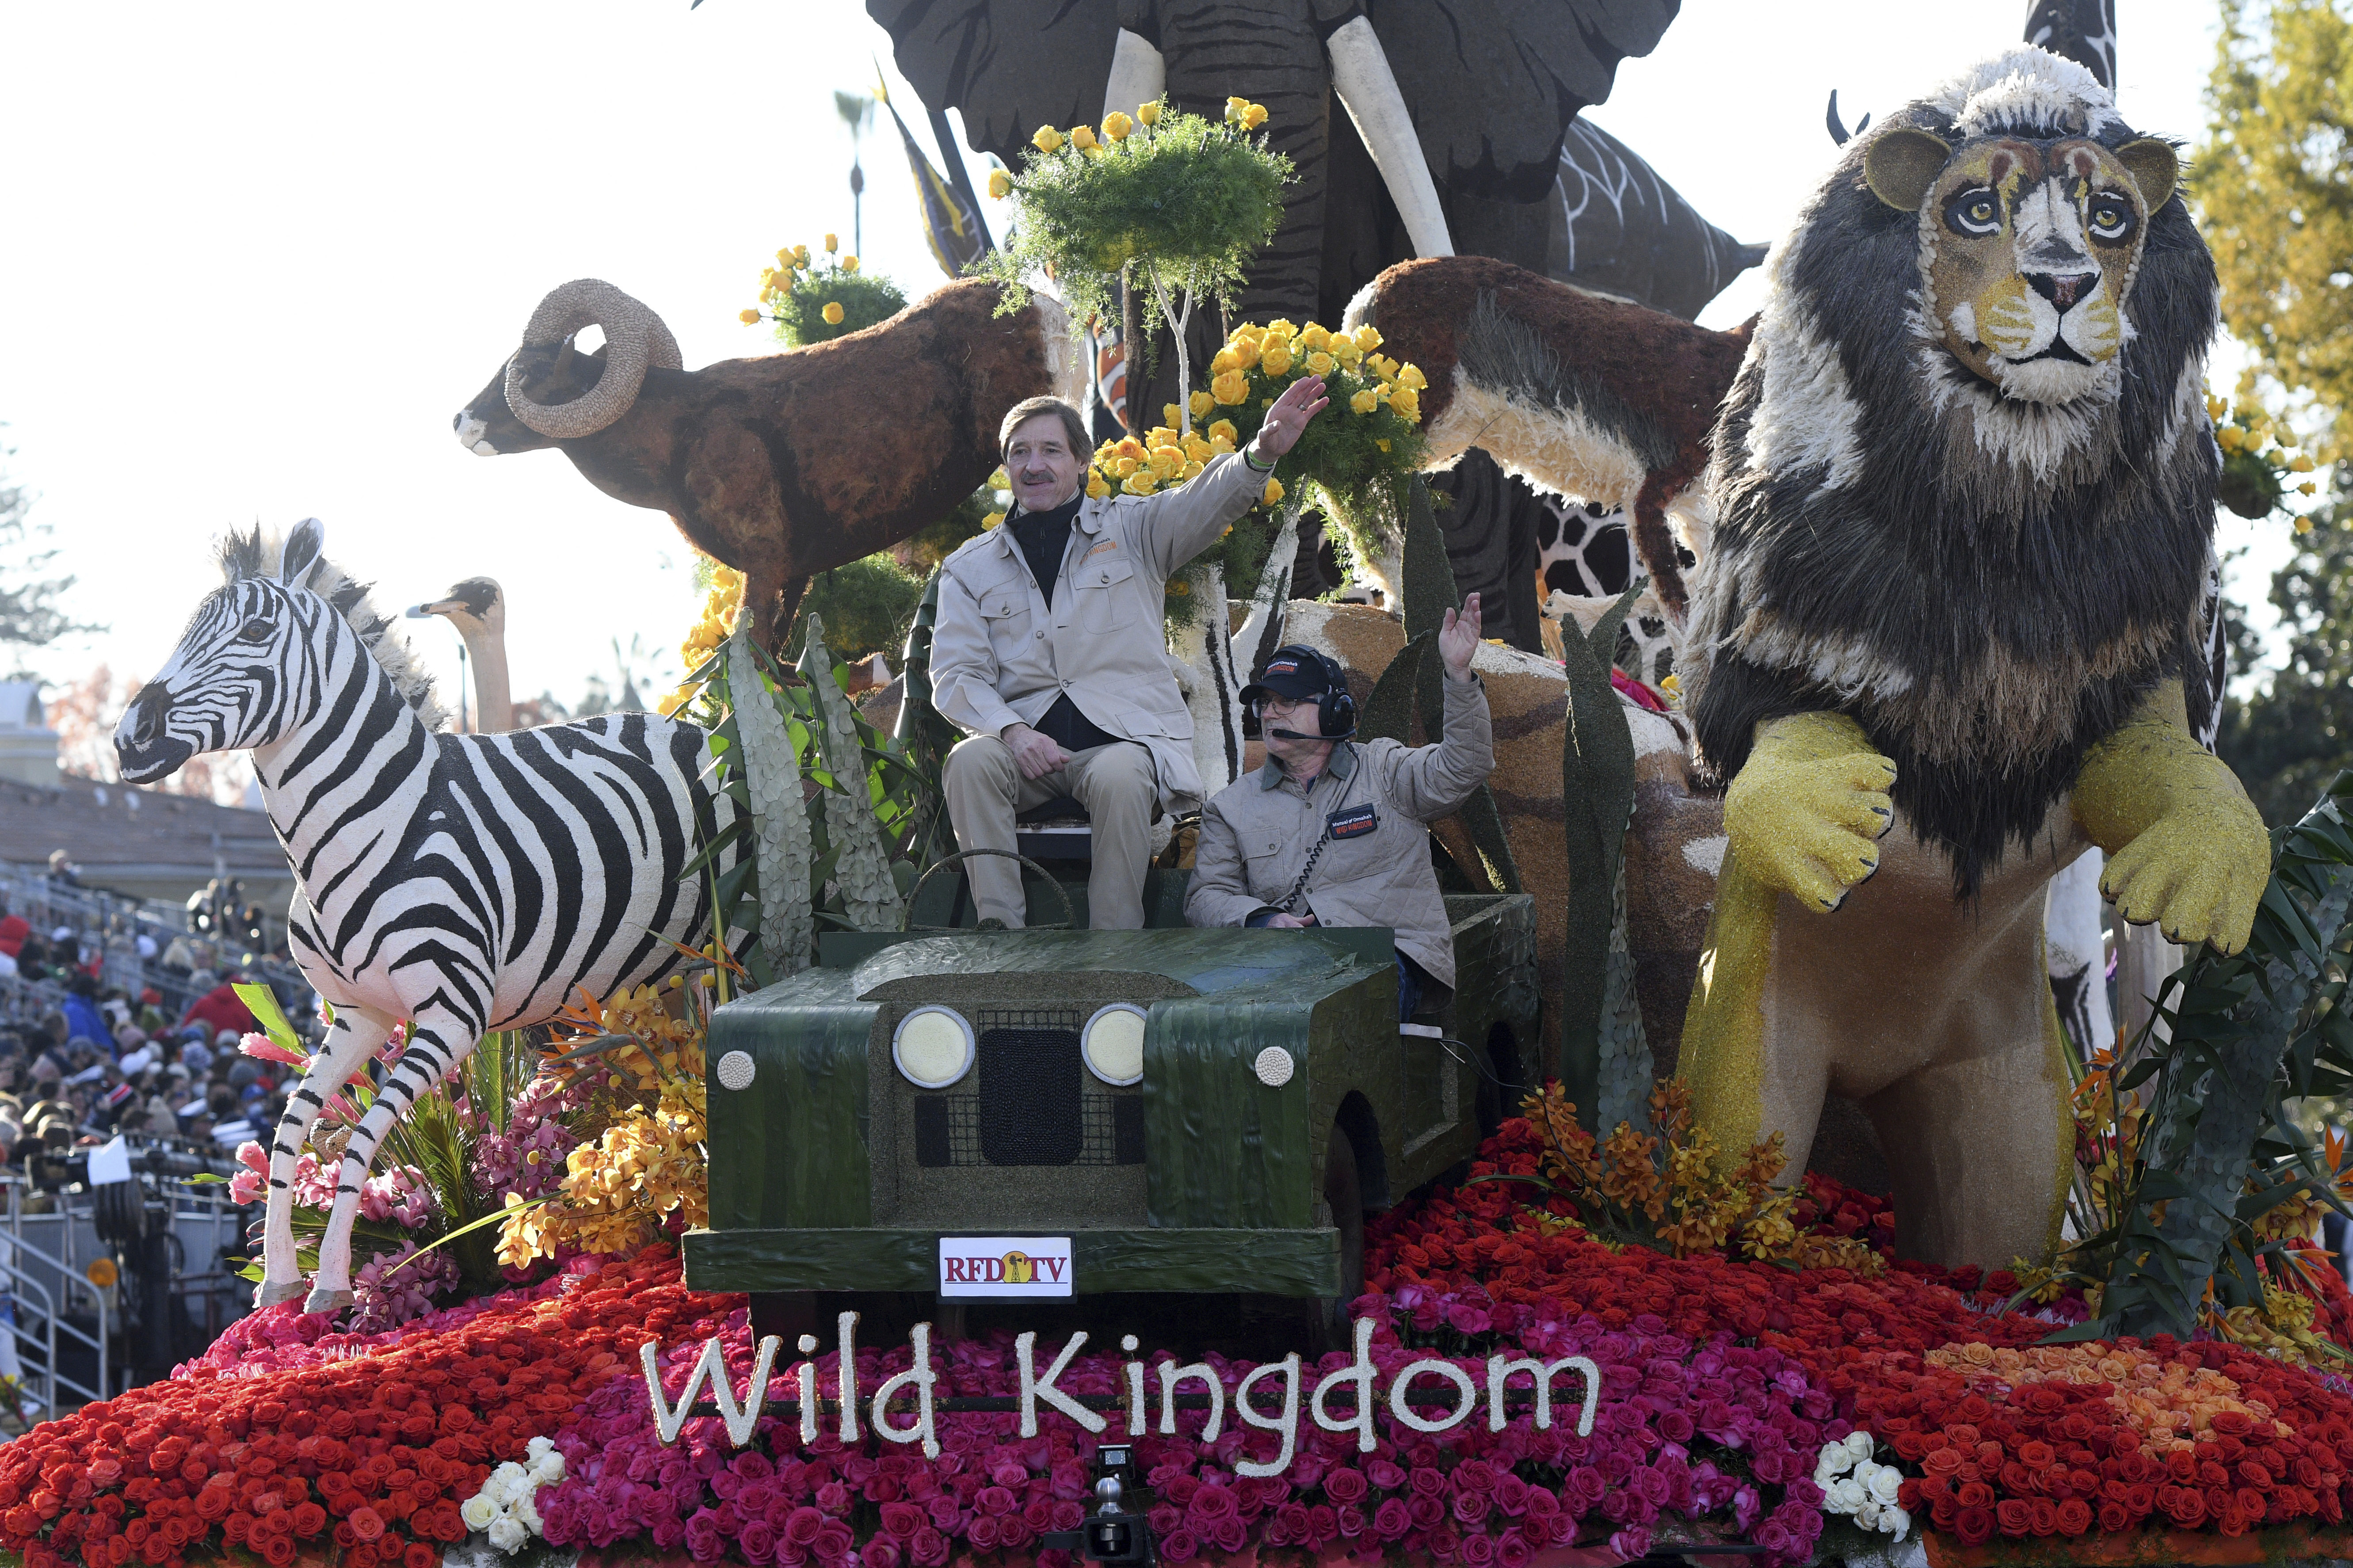 The RFD-TV / Mutual of Omaha's Wild Kingdom float is seen at the 133rd Rose Parade in Pasadena on Jan. 1, 2022. (Michael Owen Baker/Associated Press)